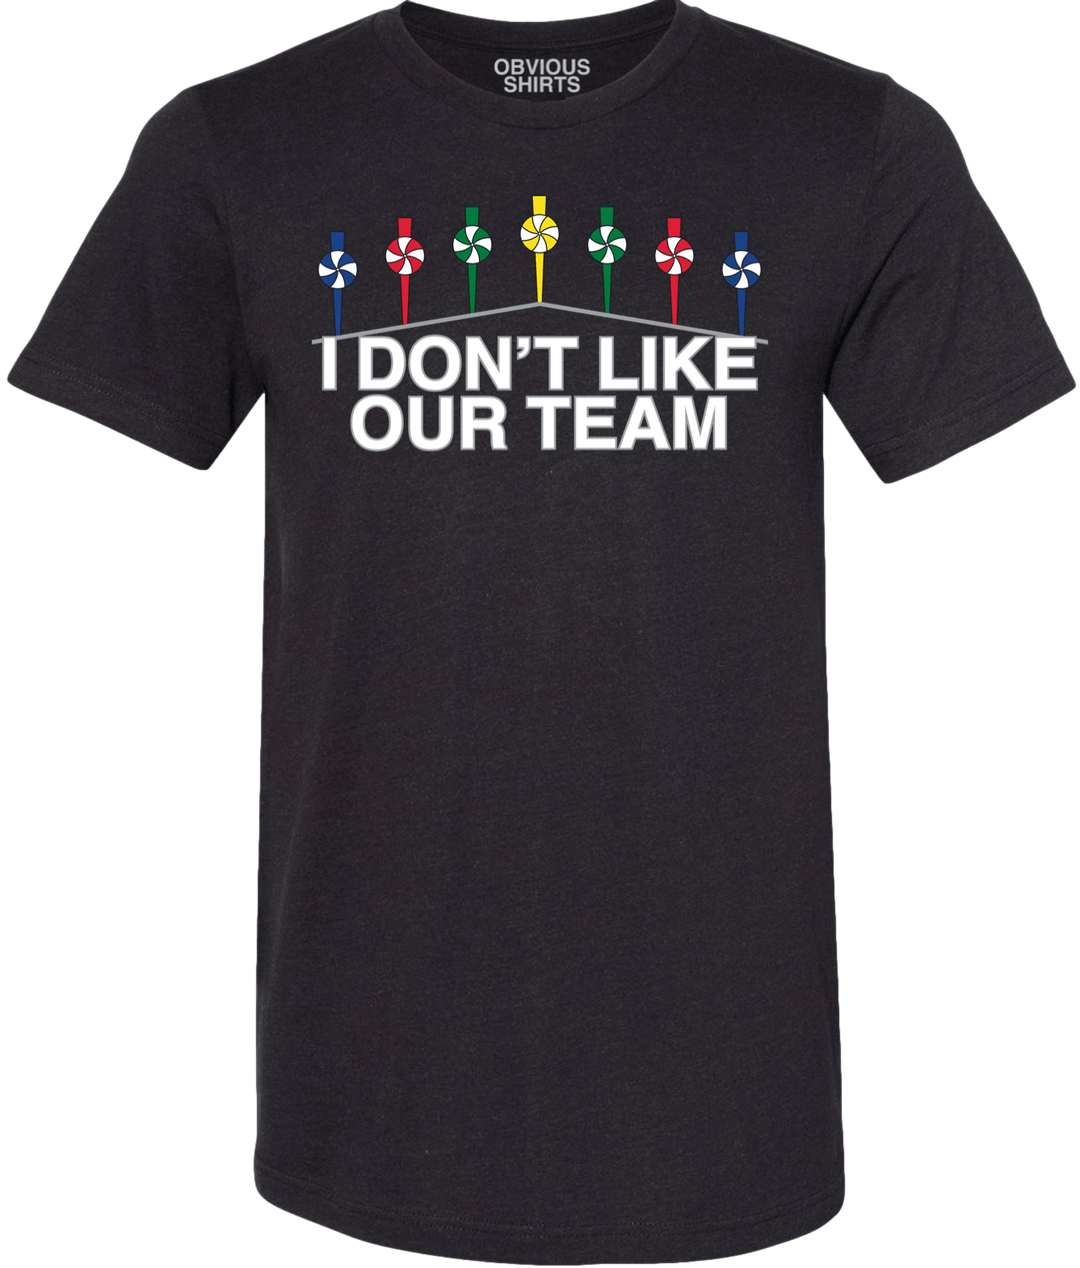 I DON'T LIKE OUR TEAM. - OBVIOUS SHIRTS